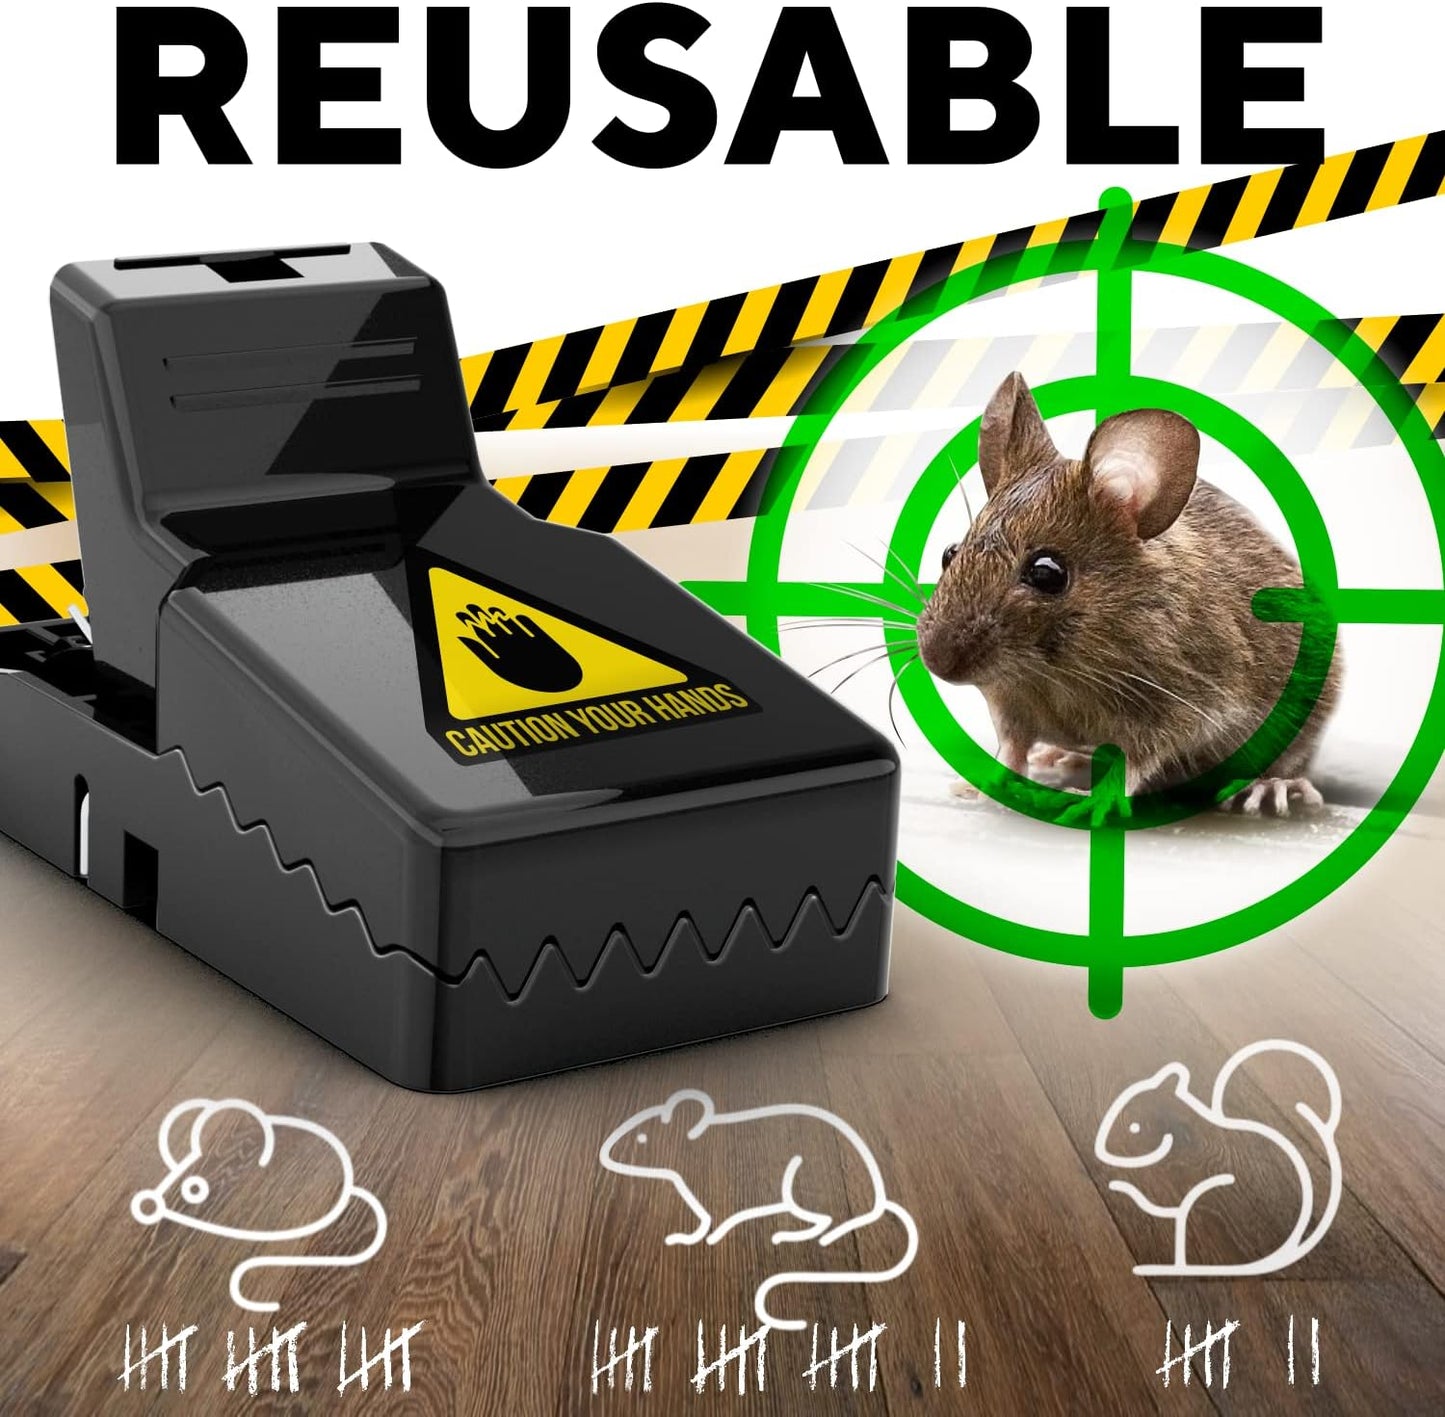 Reusable Mouse Trap (Buy One Get One Free)